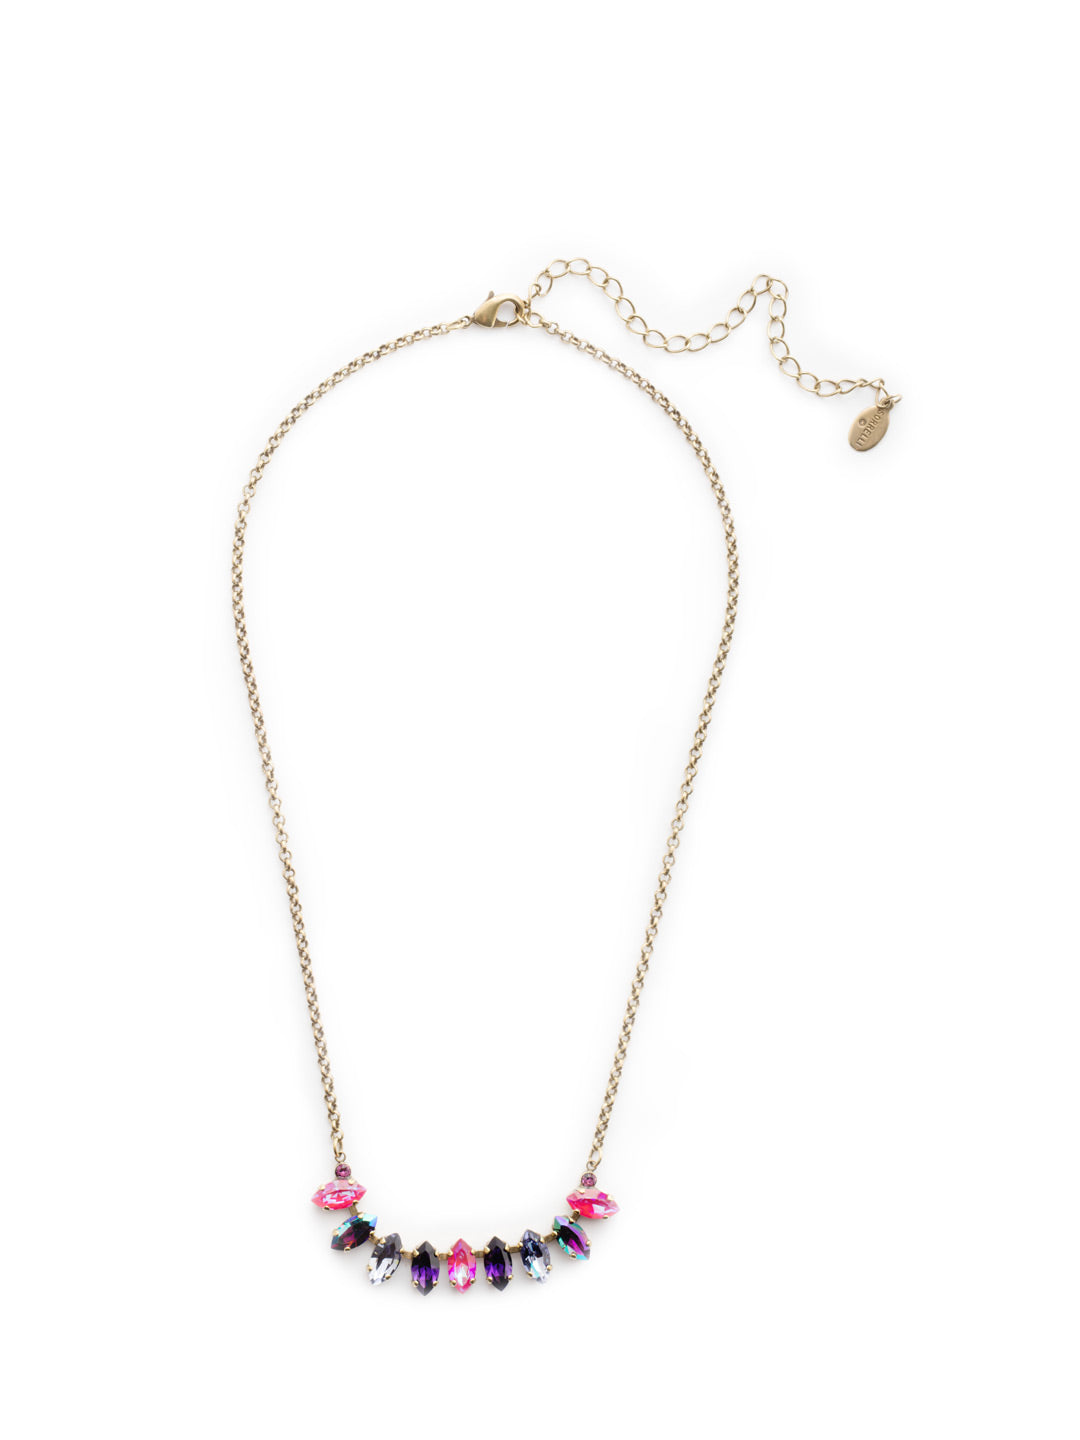 Clarissa Tennis Necklace - NEP4AGDCS - The Clarissa Tennis Necklace puts a row of sparkling navette crystals front and center. Put it on when you want to be there, too. From Sorrelli's Duchess collection in our Antique Gold-tone finish.